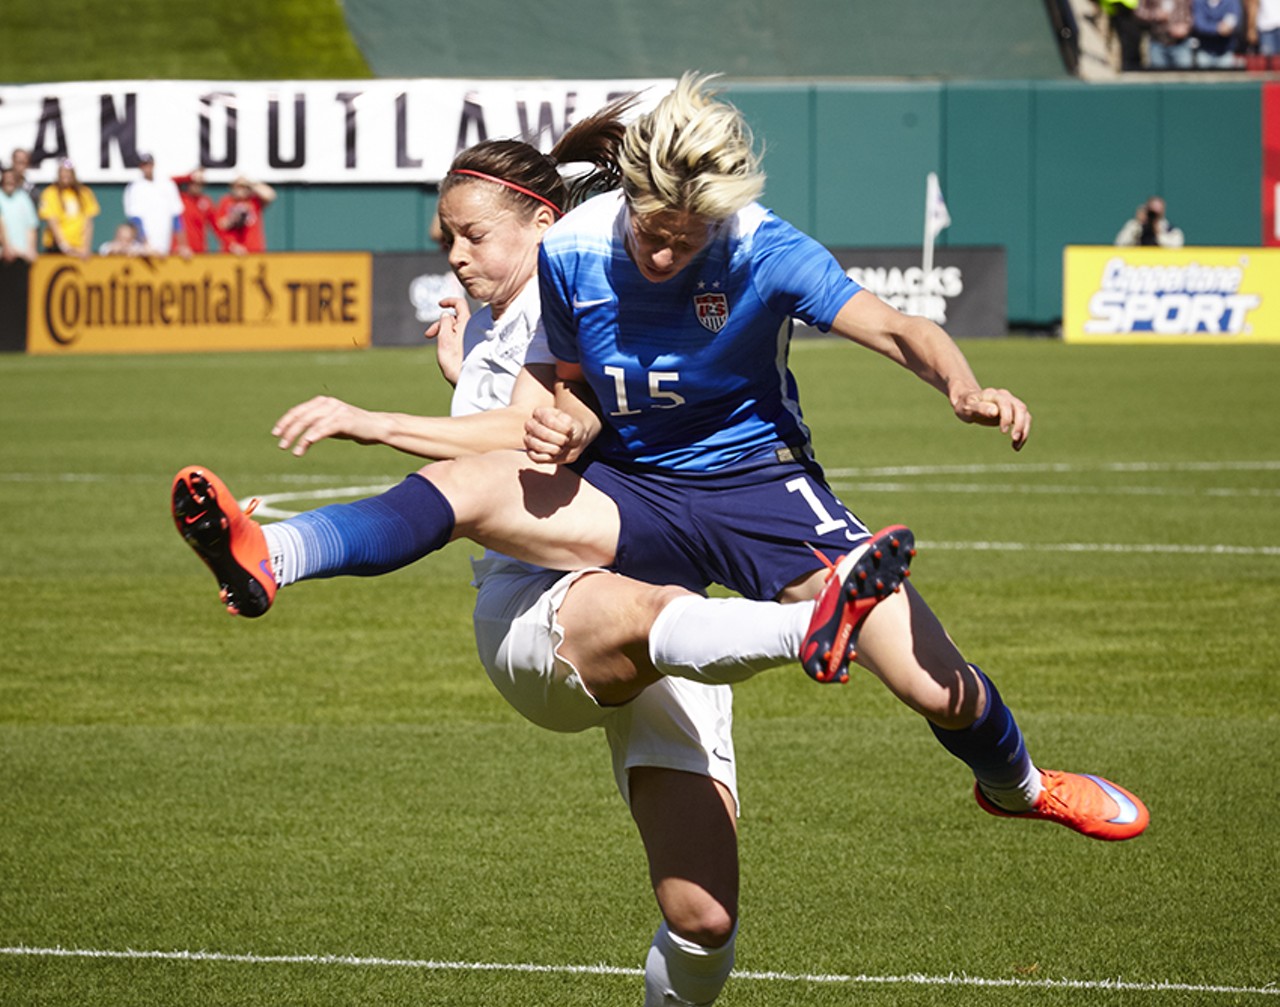 Rapinoe in a mid-air collisiion to end her break away.